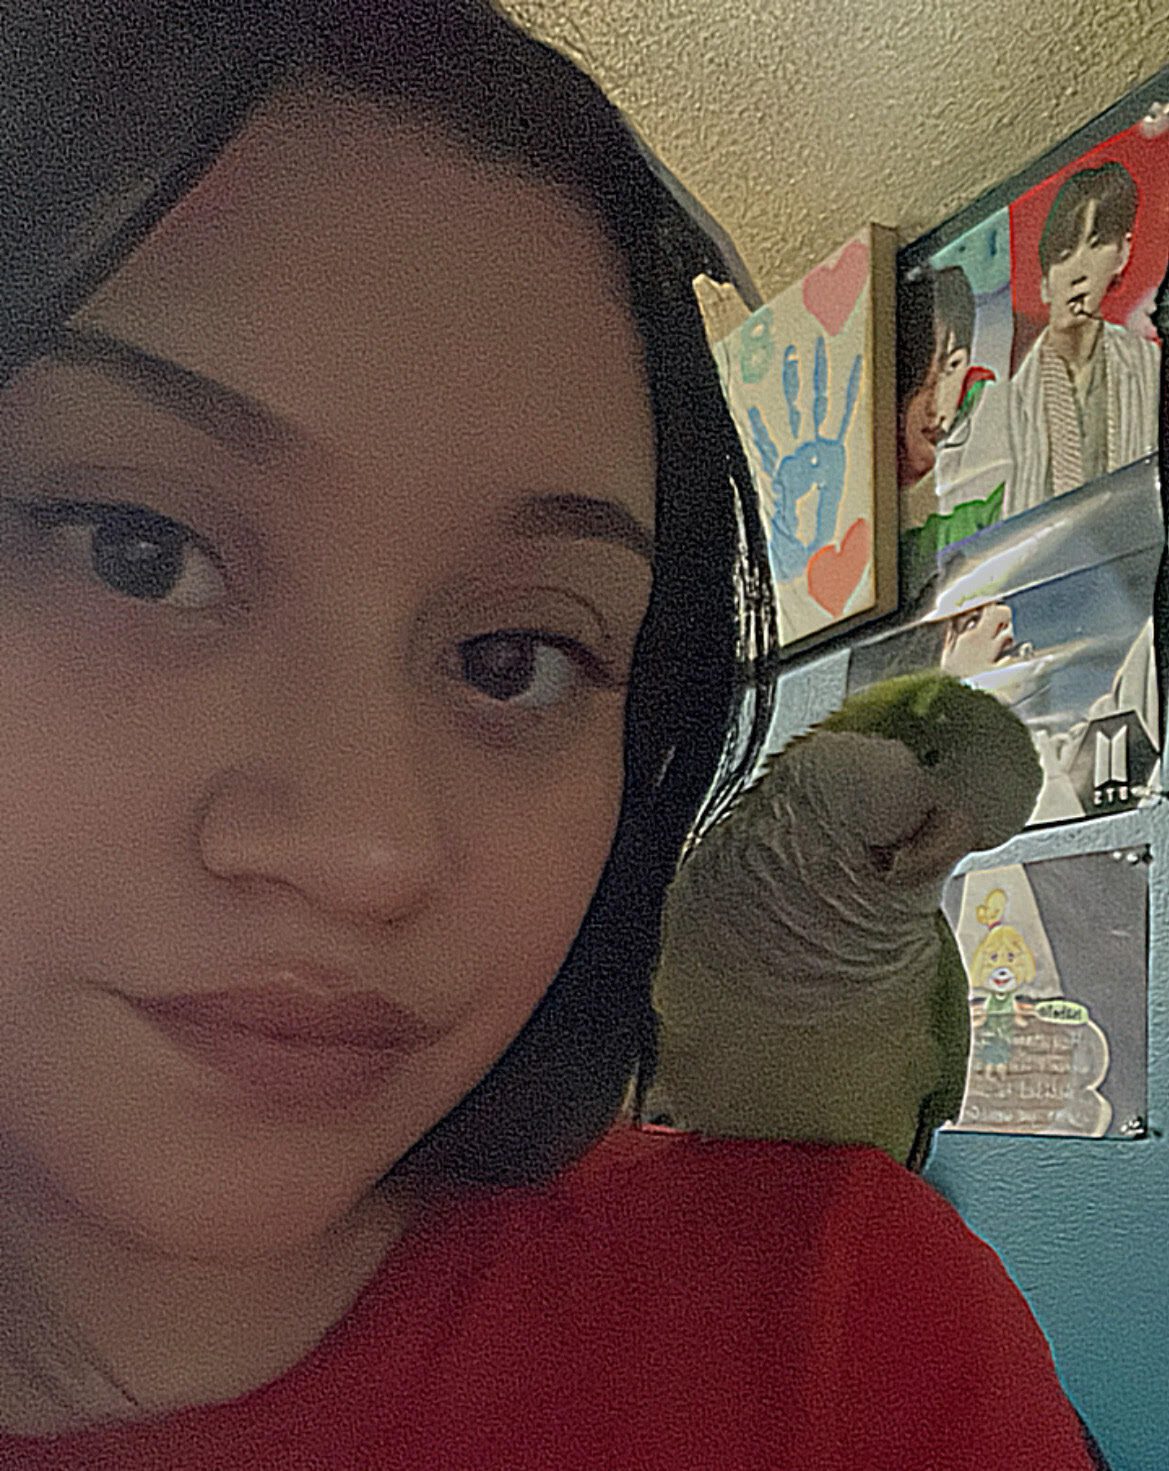 Jasmine is on the left and on her shoulder is her pet, Quaker parrot, Scooby. Scooby is a green, gray parrot. She is wearing a red, Chicago Bulls College Prep shirt. She is smiling at the camera. Scooby is also posing at the camera.